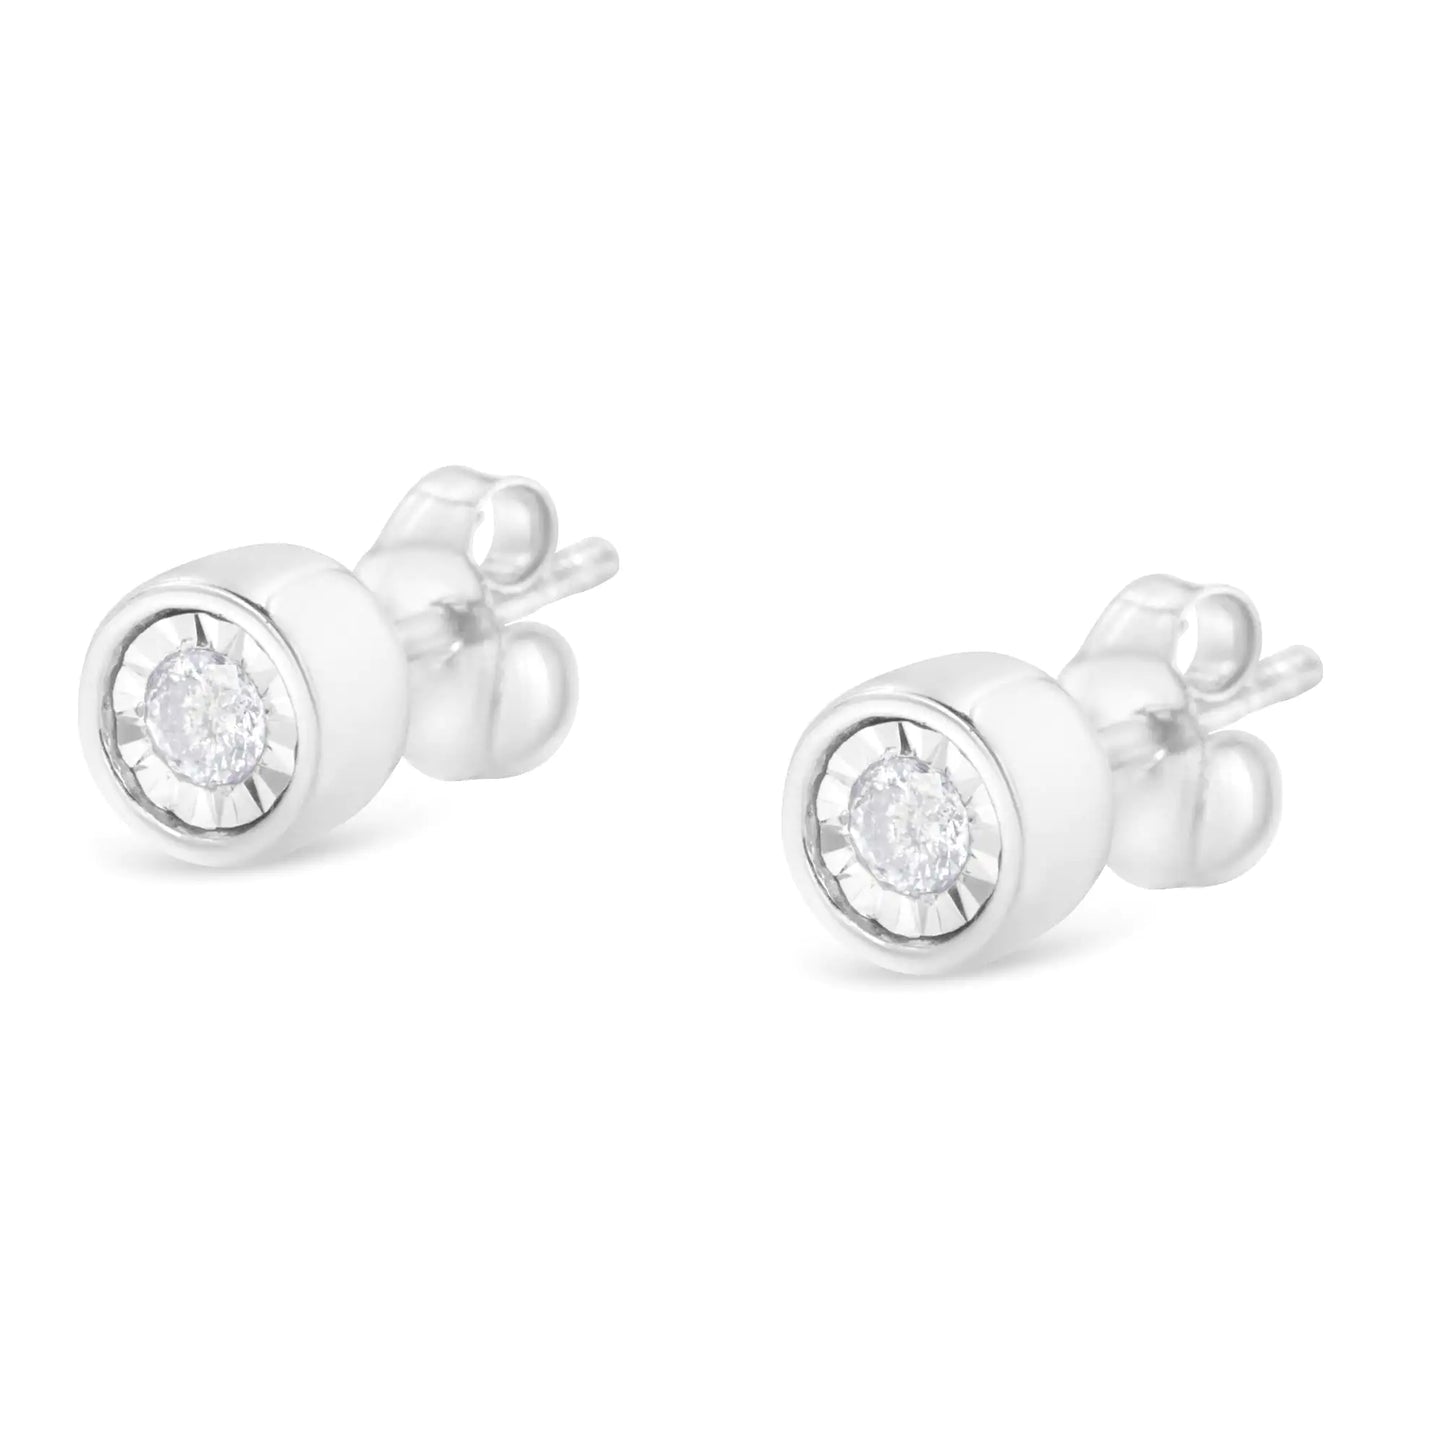 .925 Sterling Silver 1/5 Cttw Round Brilliant-Cut Near Colorless Diamond Miracle-Set Bezel Barrel Style Stud Earrings (I-J Color, I2-I3 Clarity)